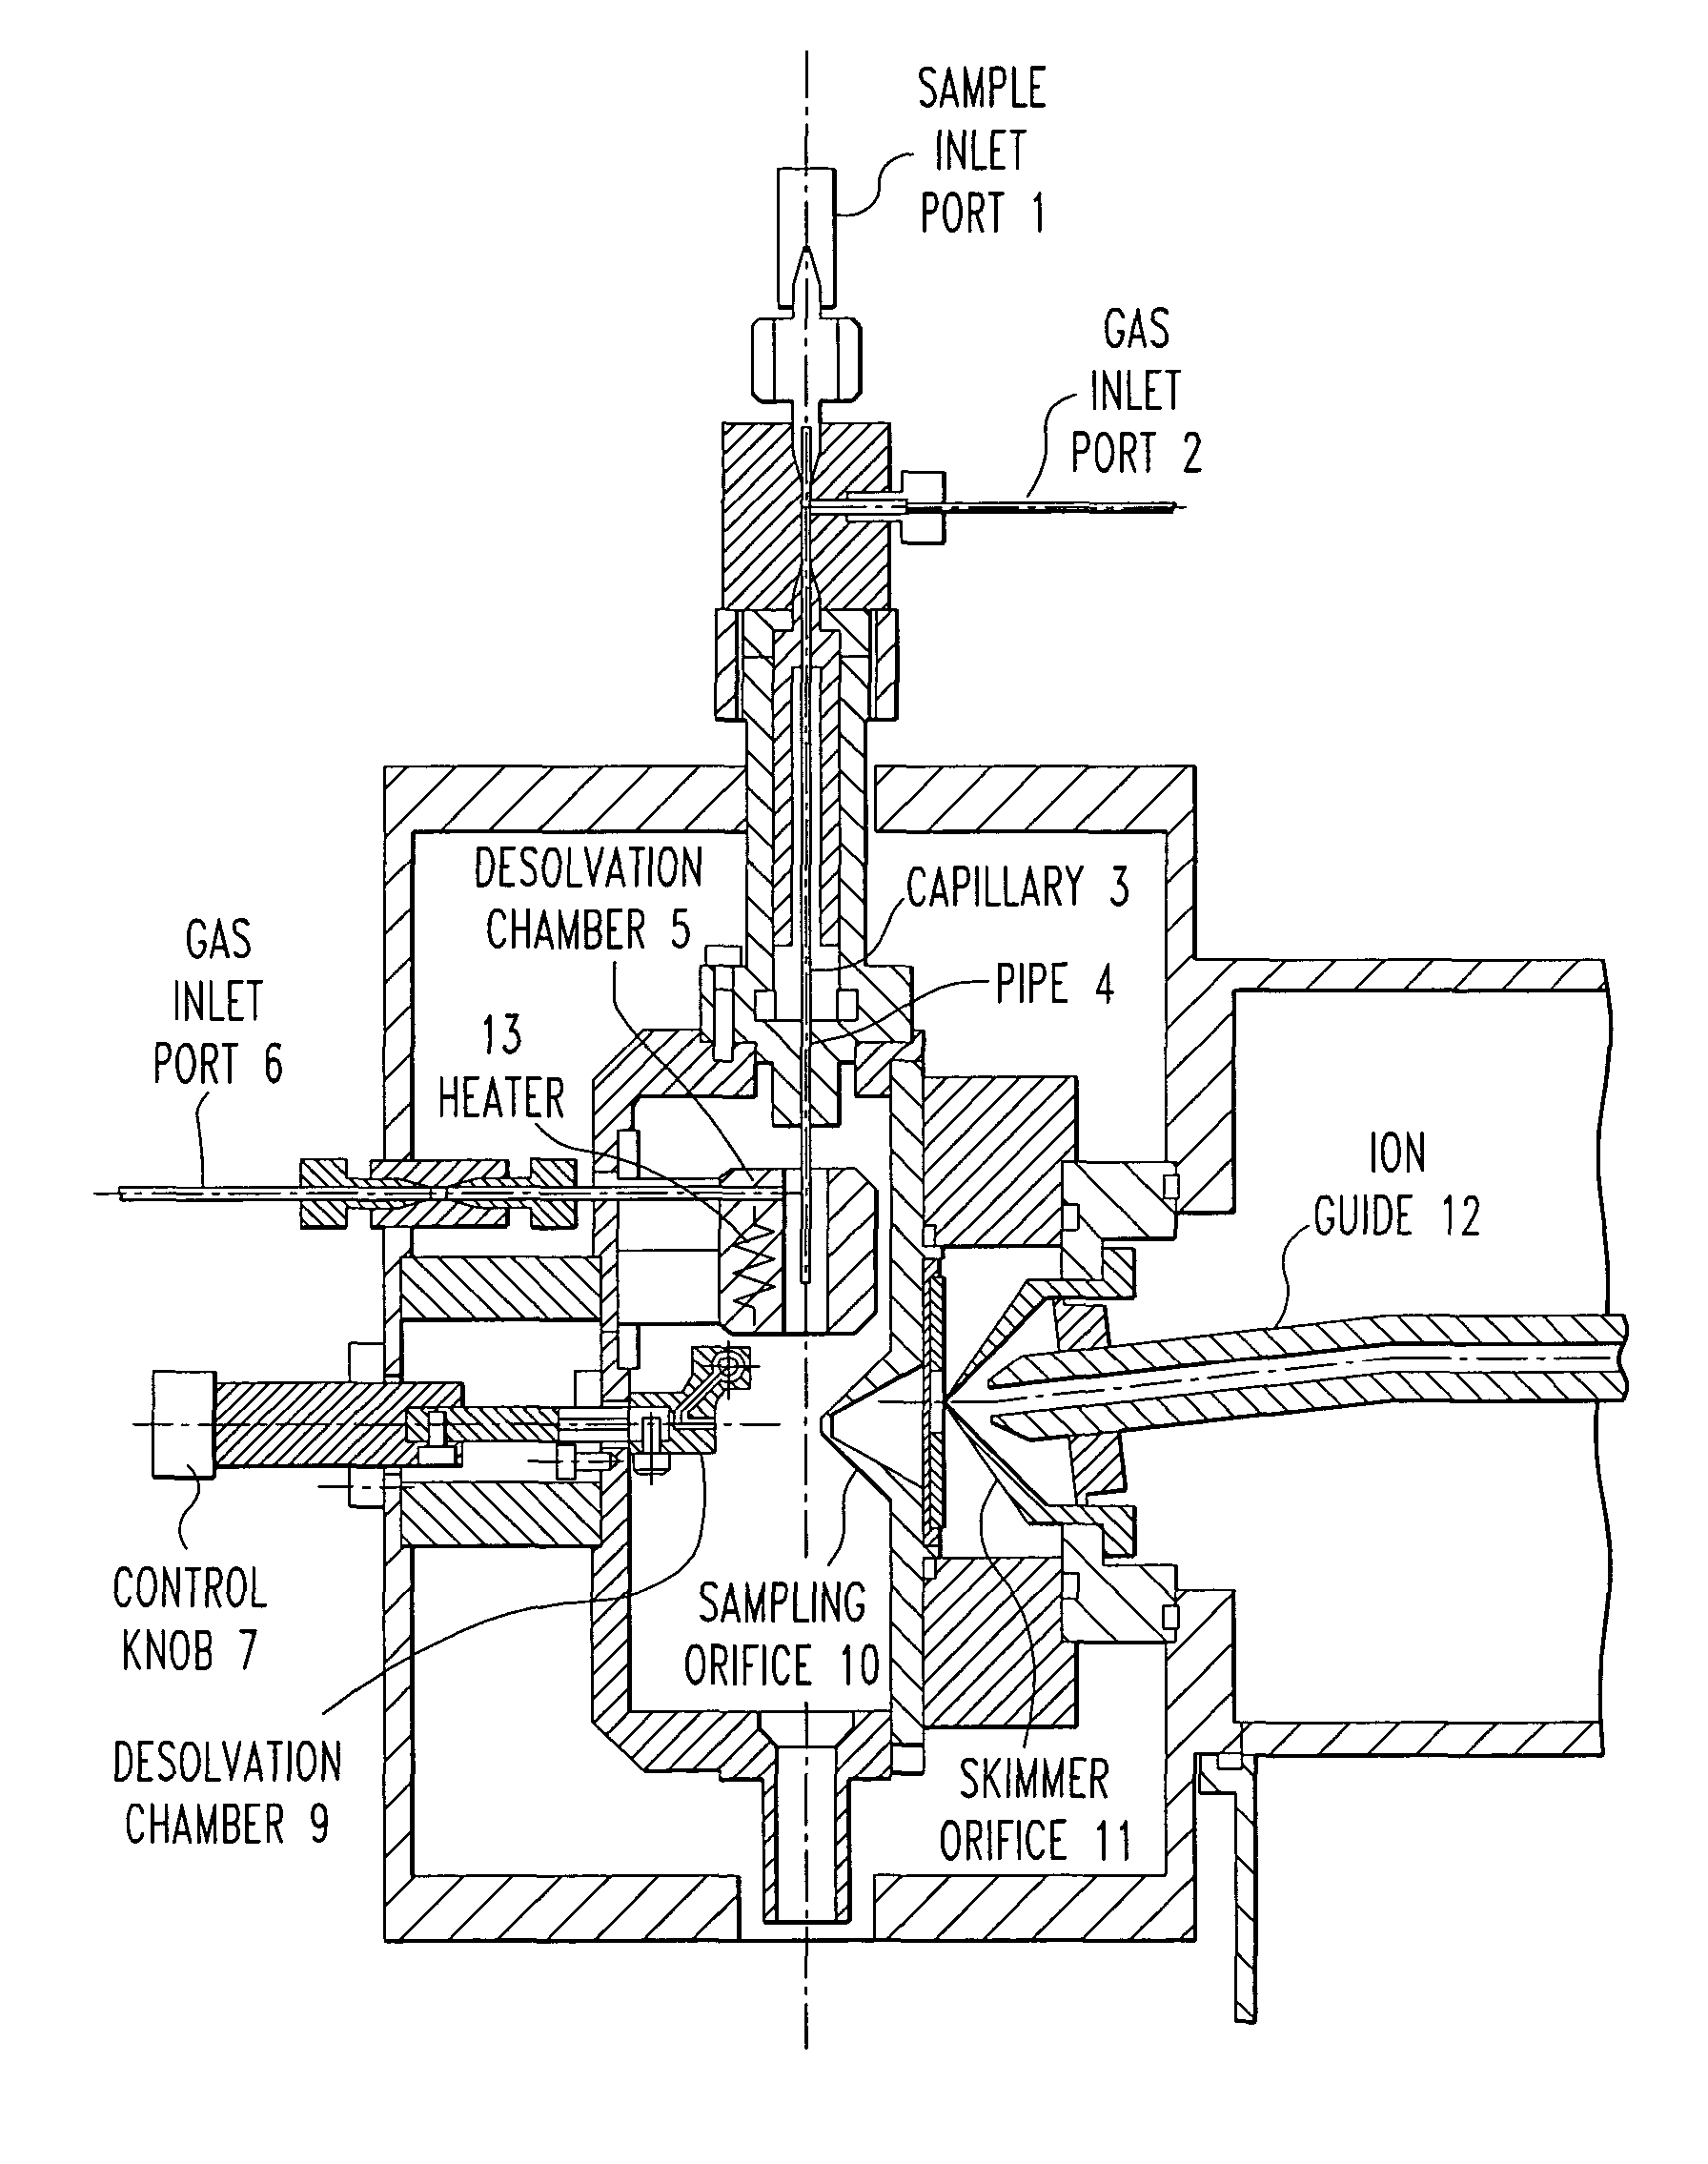 Electrospray mass spectrometer and ion source